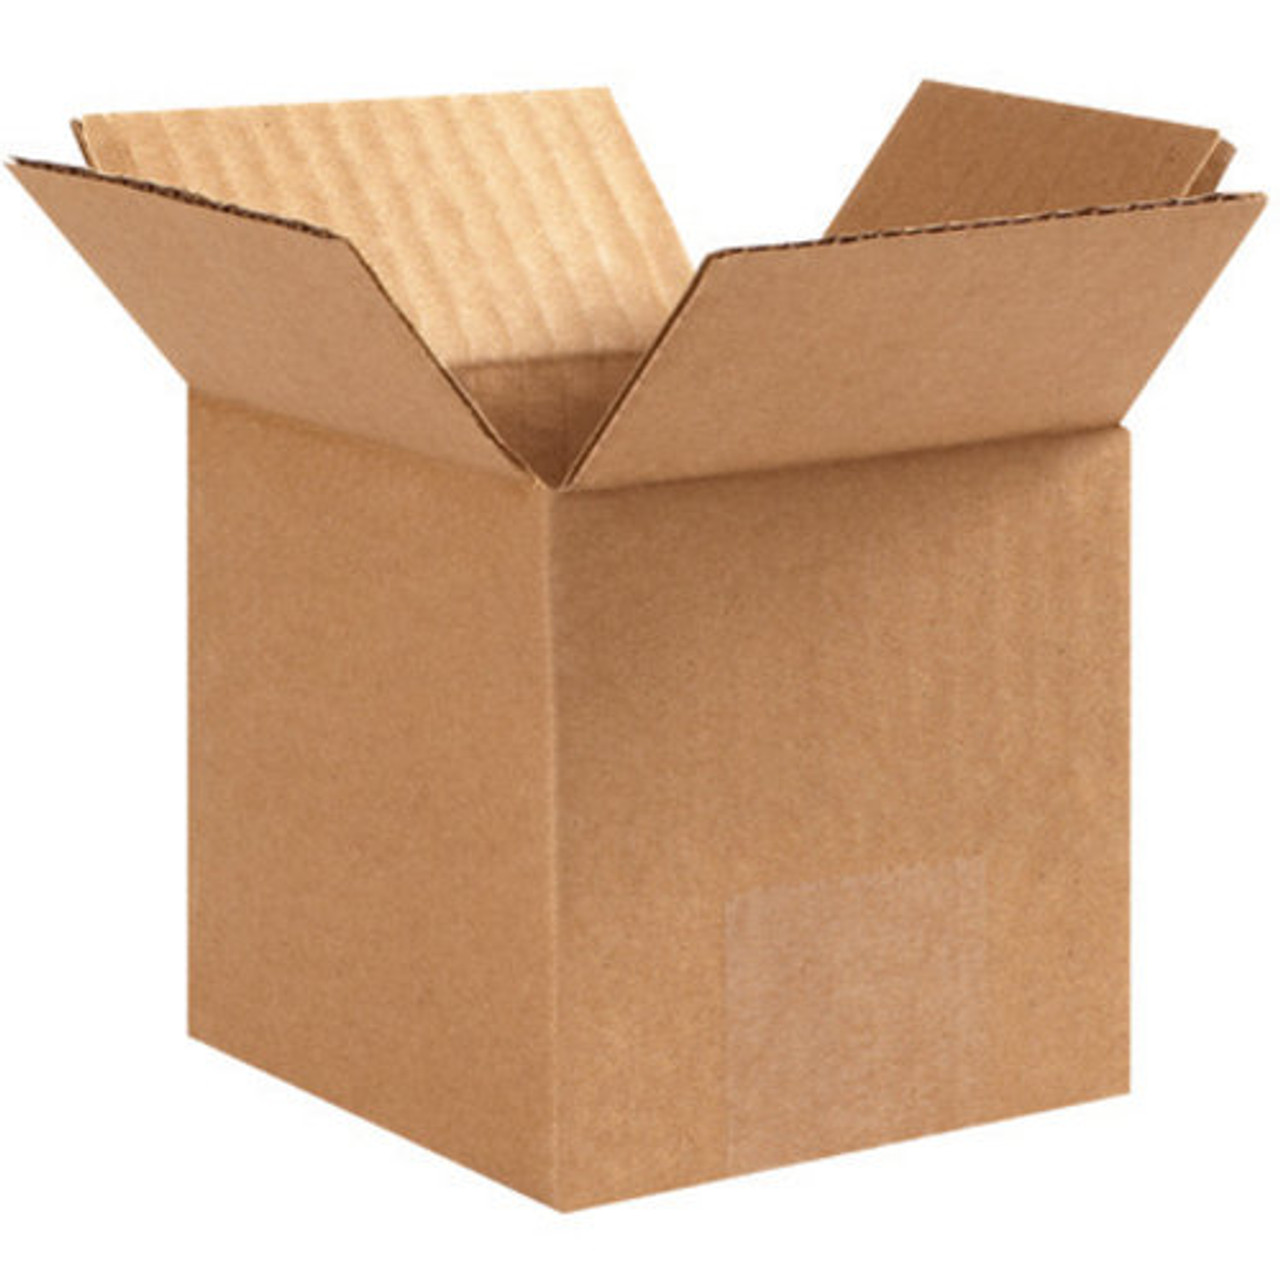 Cardboard Vs. Corrugated Shipping Boxes